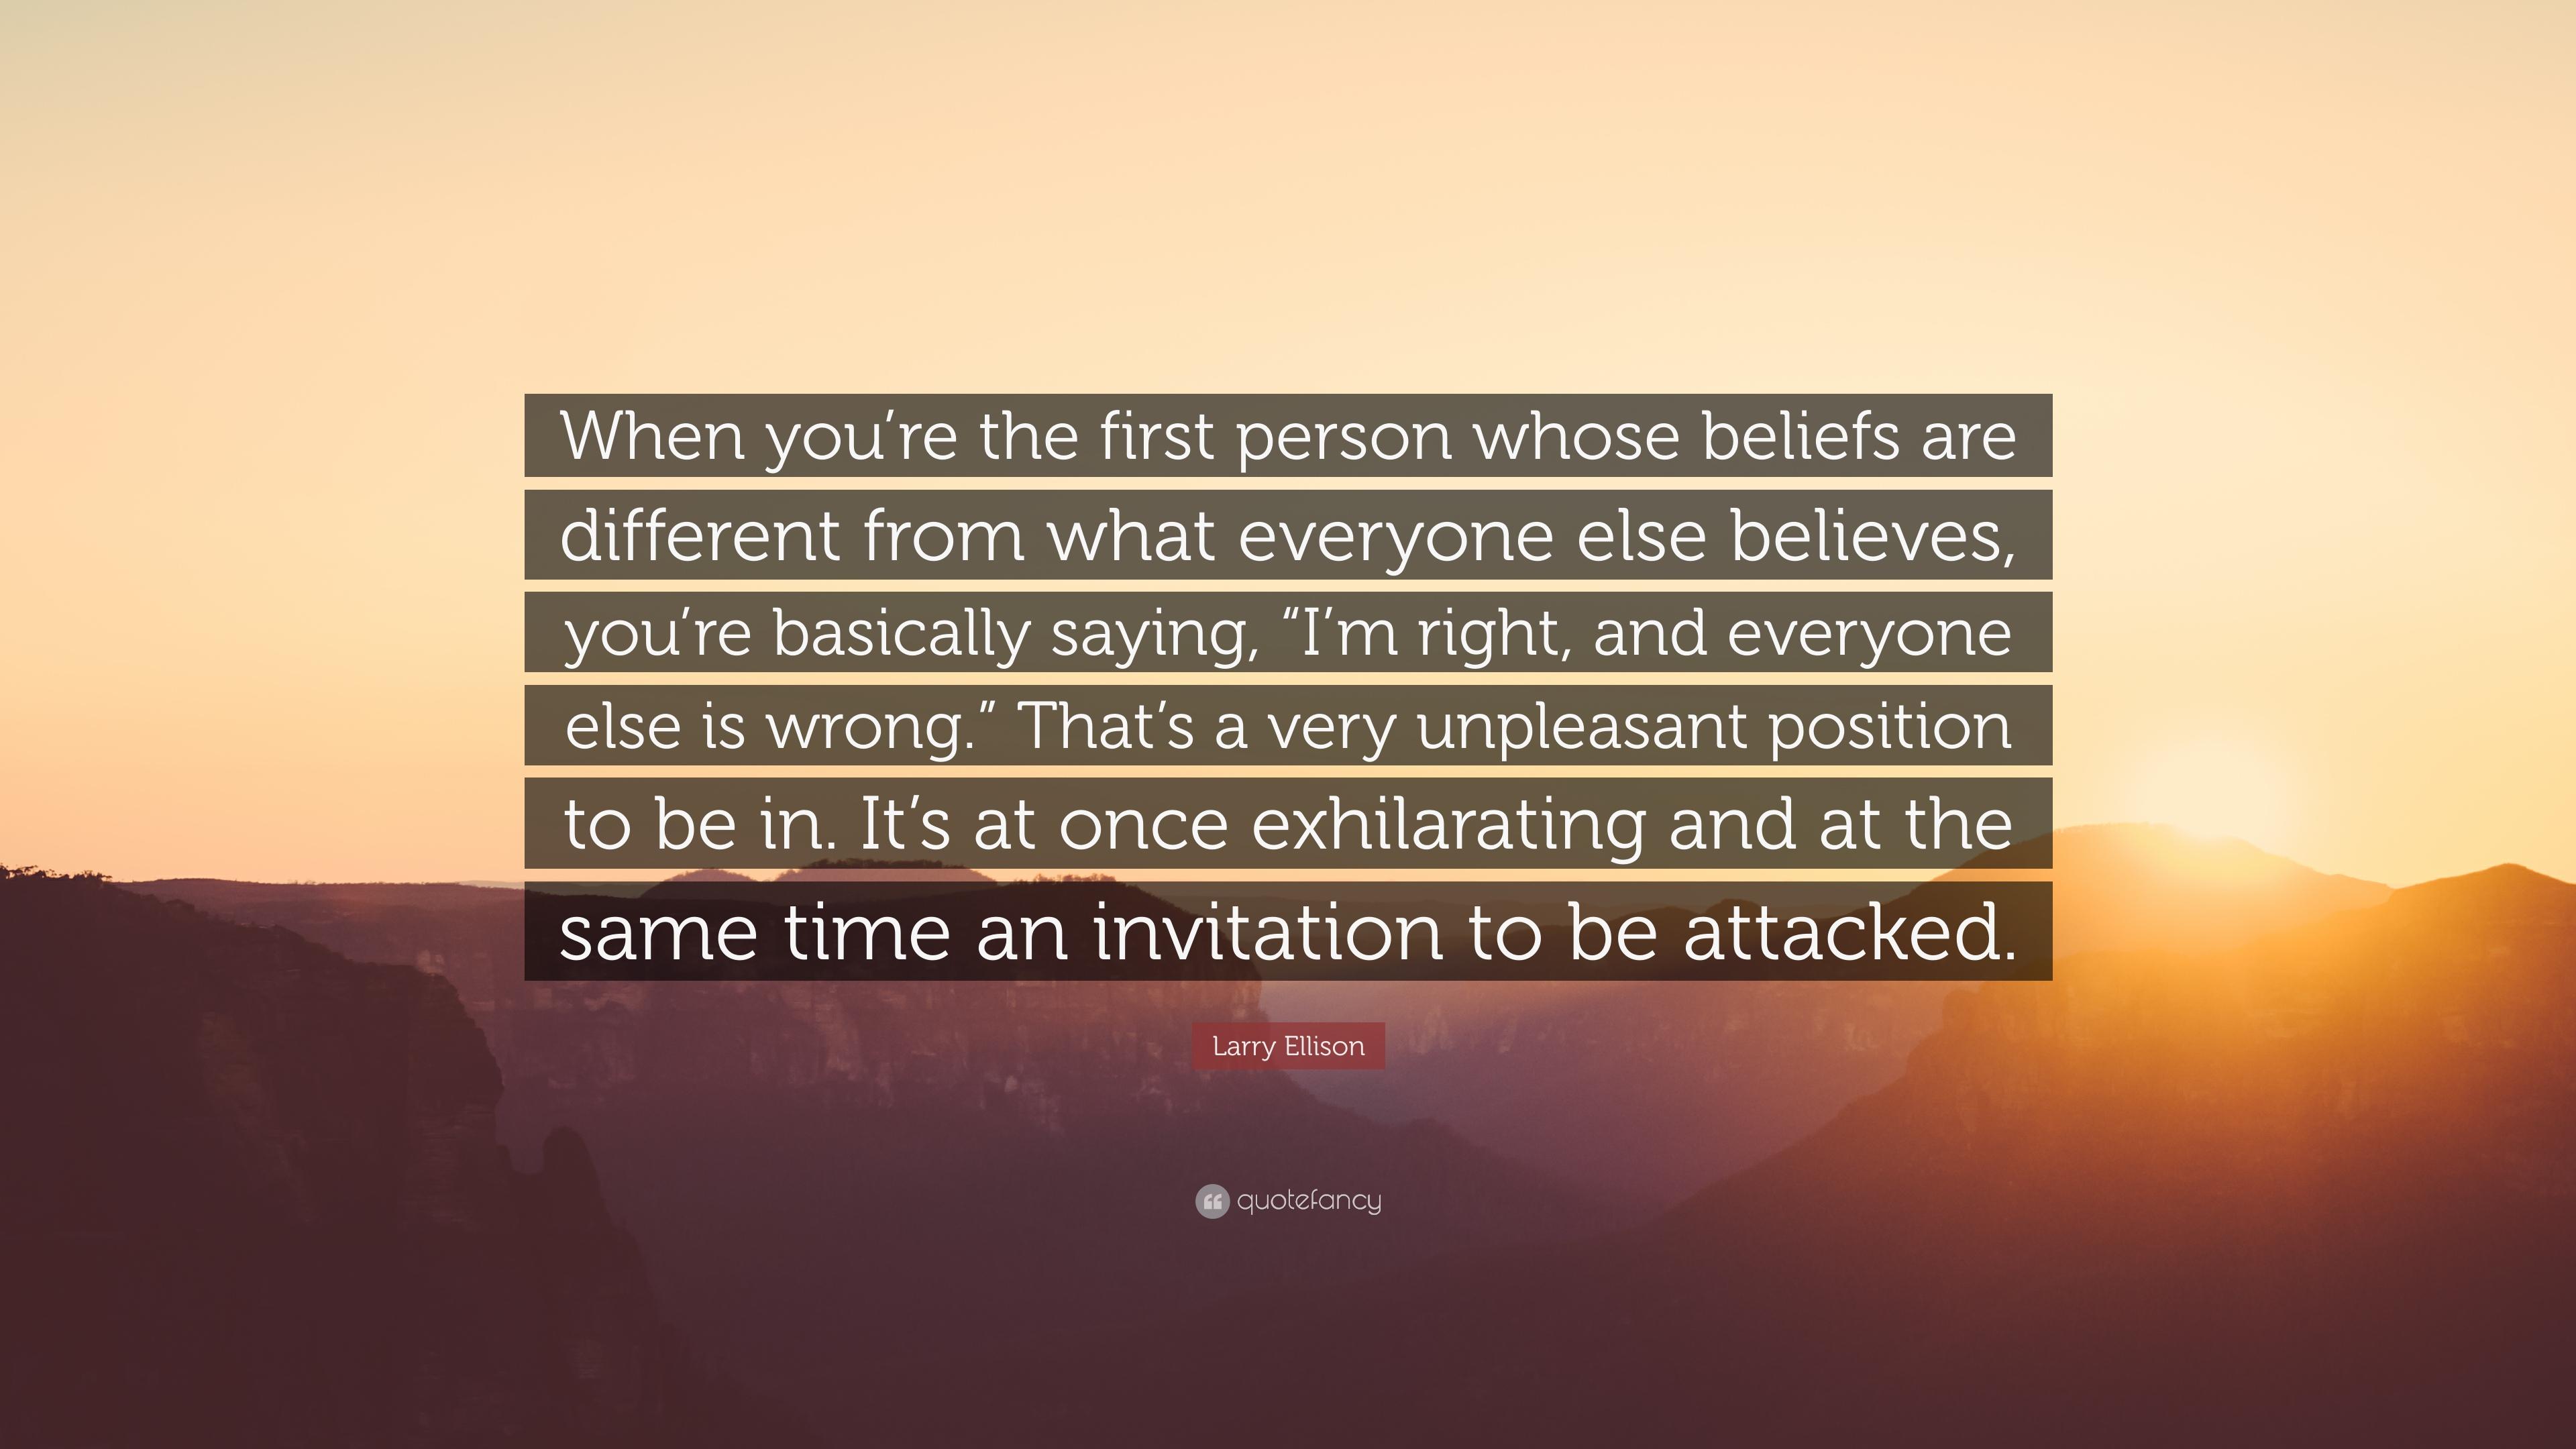 Larry Ellison Quote: “When you're the first person whose beliefs are